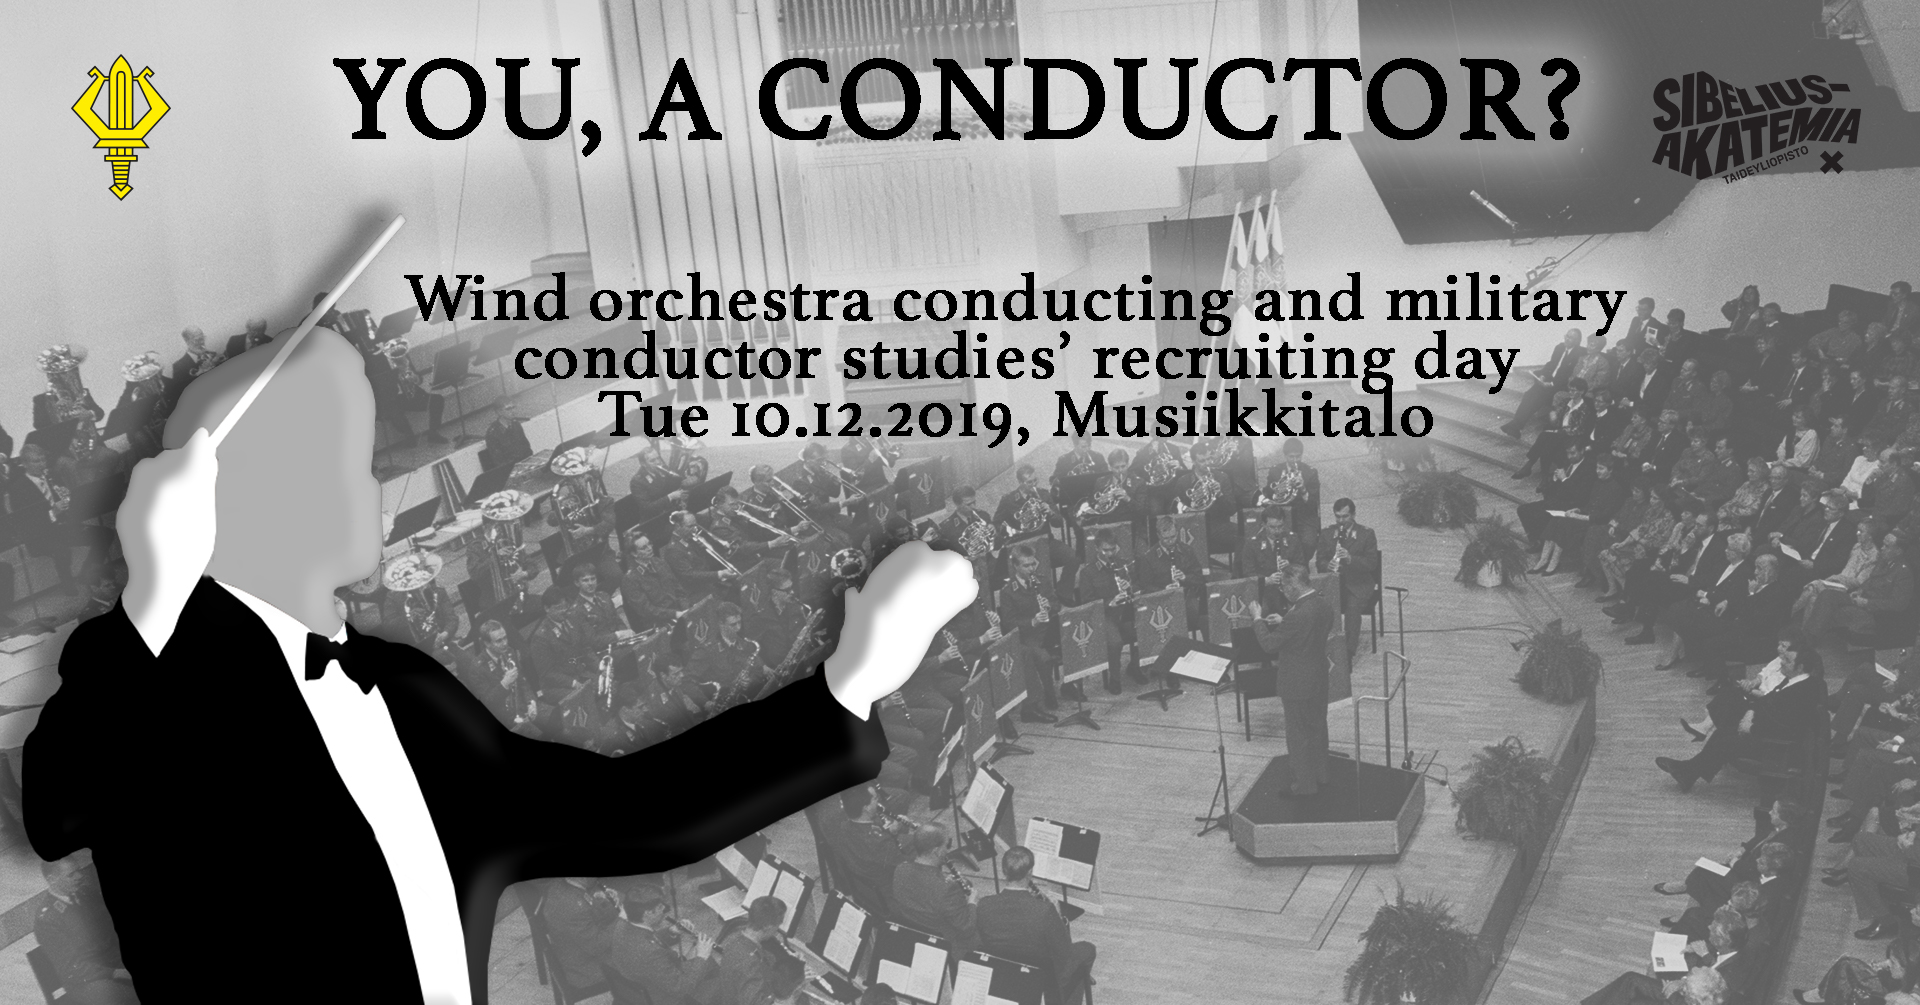 You, a conductor? Open for more.